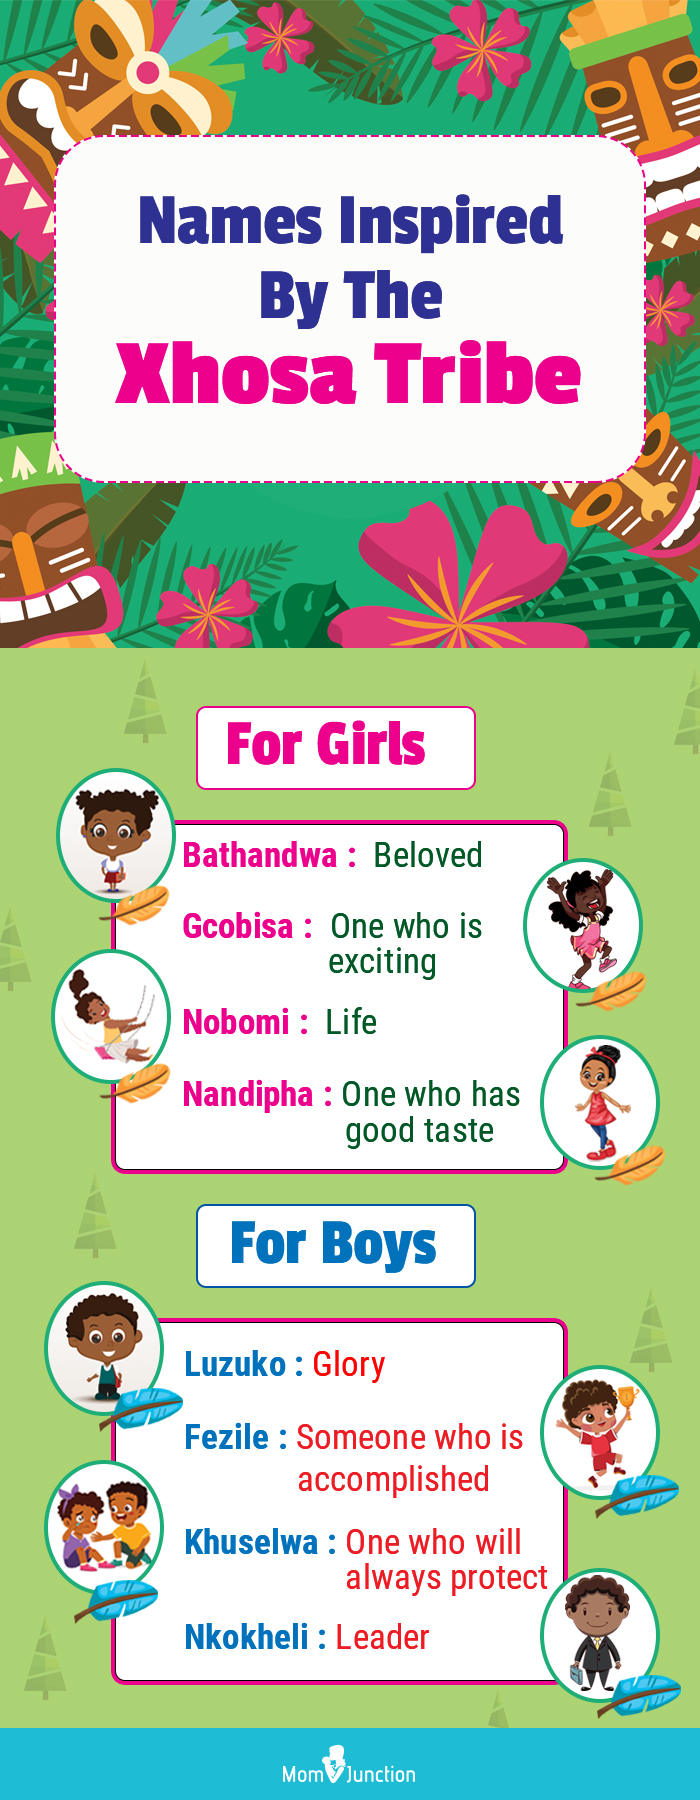 names inspired by the xhosa tribe [infographic]